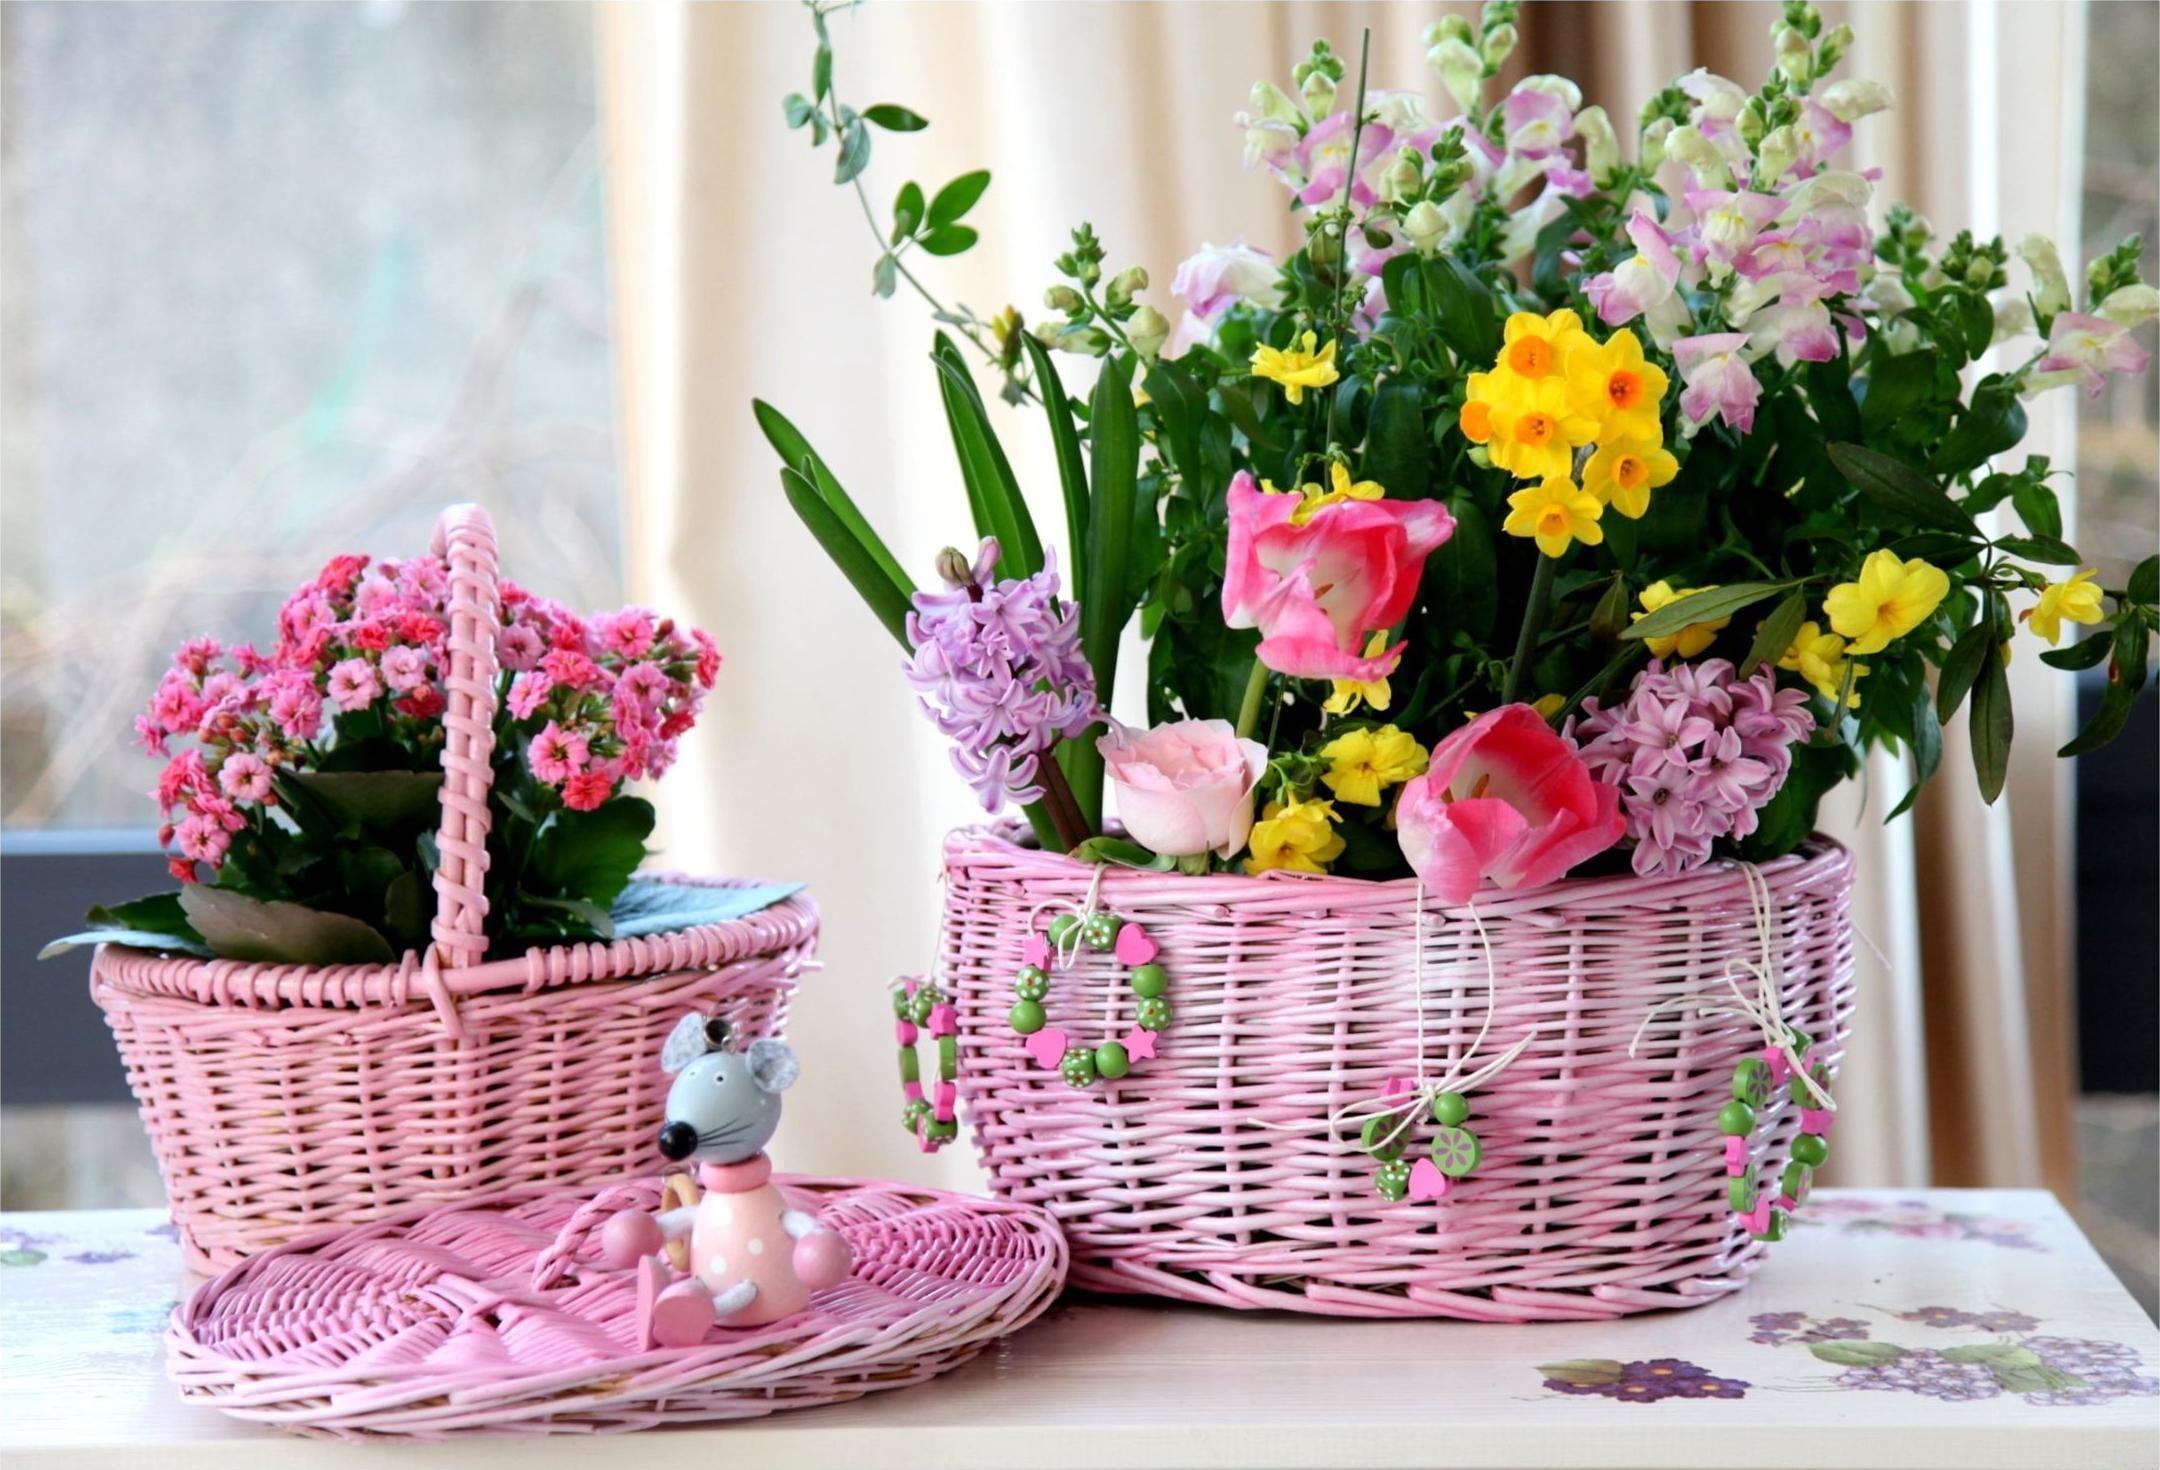 two pink wicker baskets, roses, hyacinths, daffodils, tulips